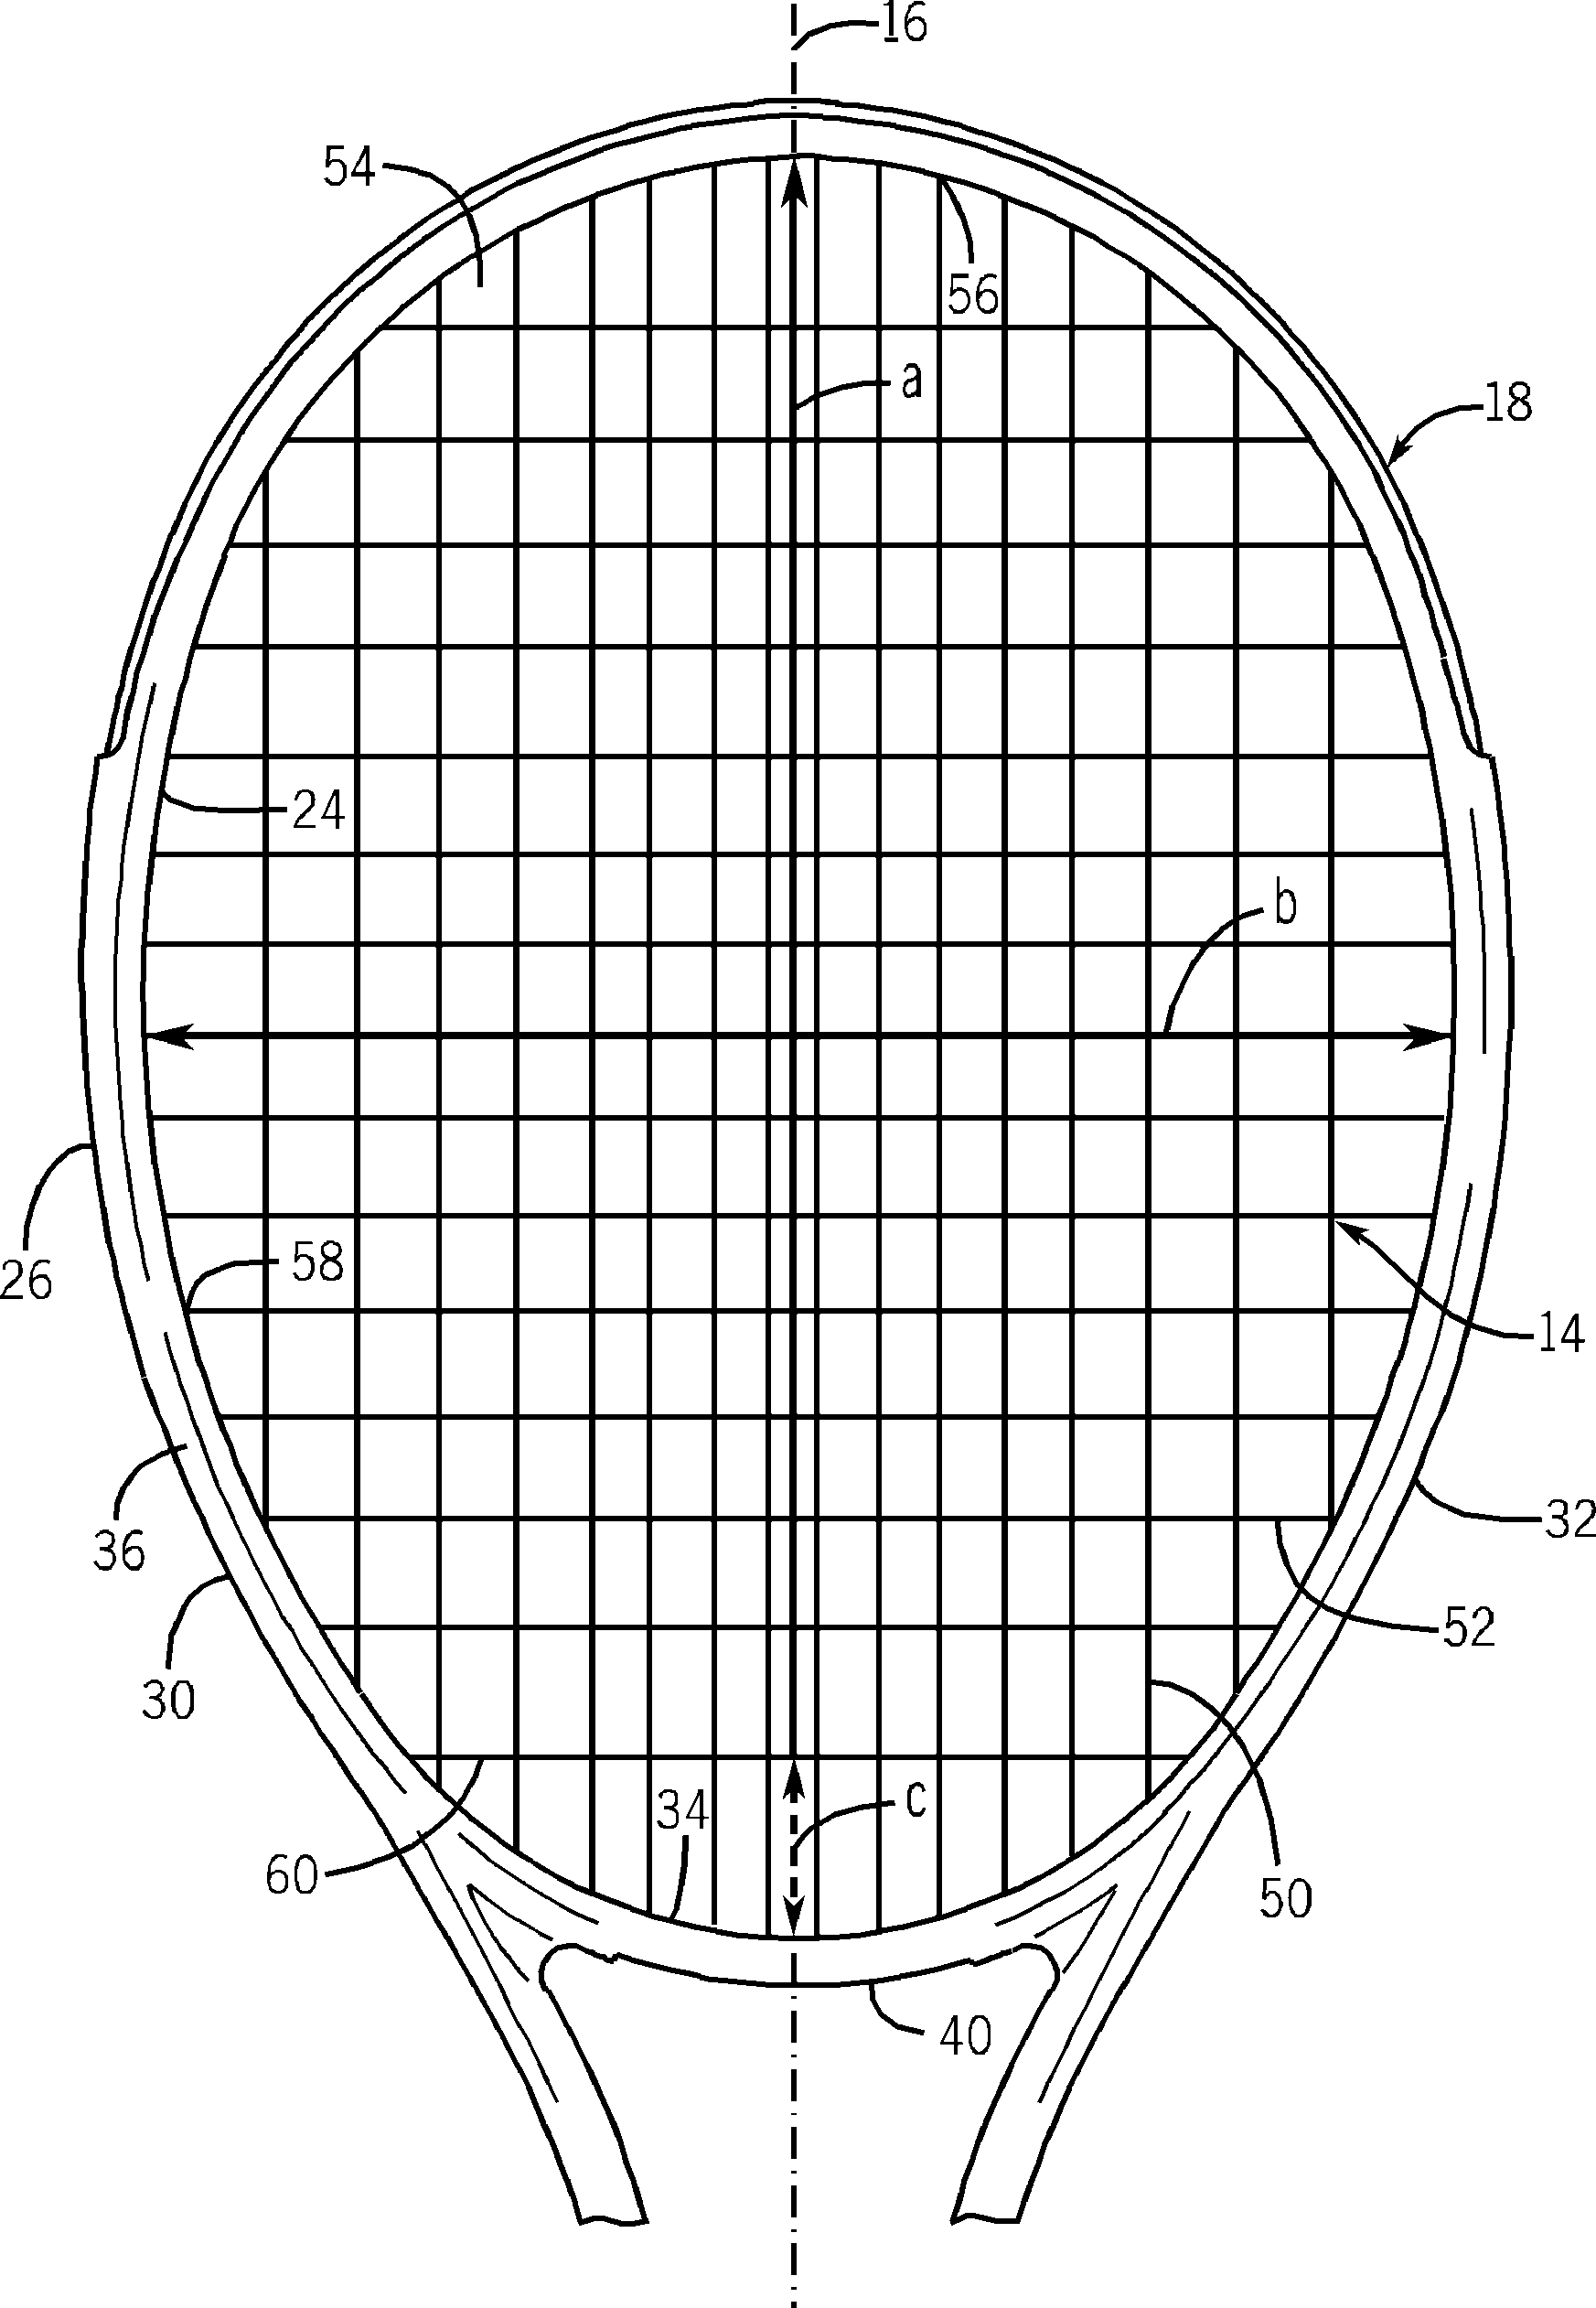 Racquet configured with fewer cross strings than main strings